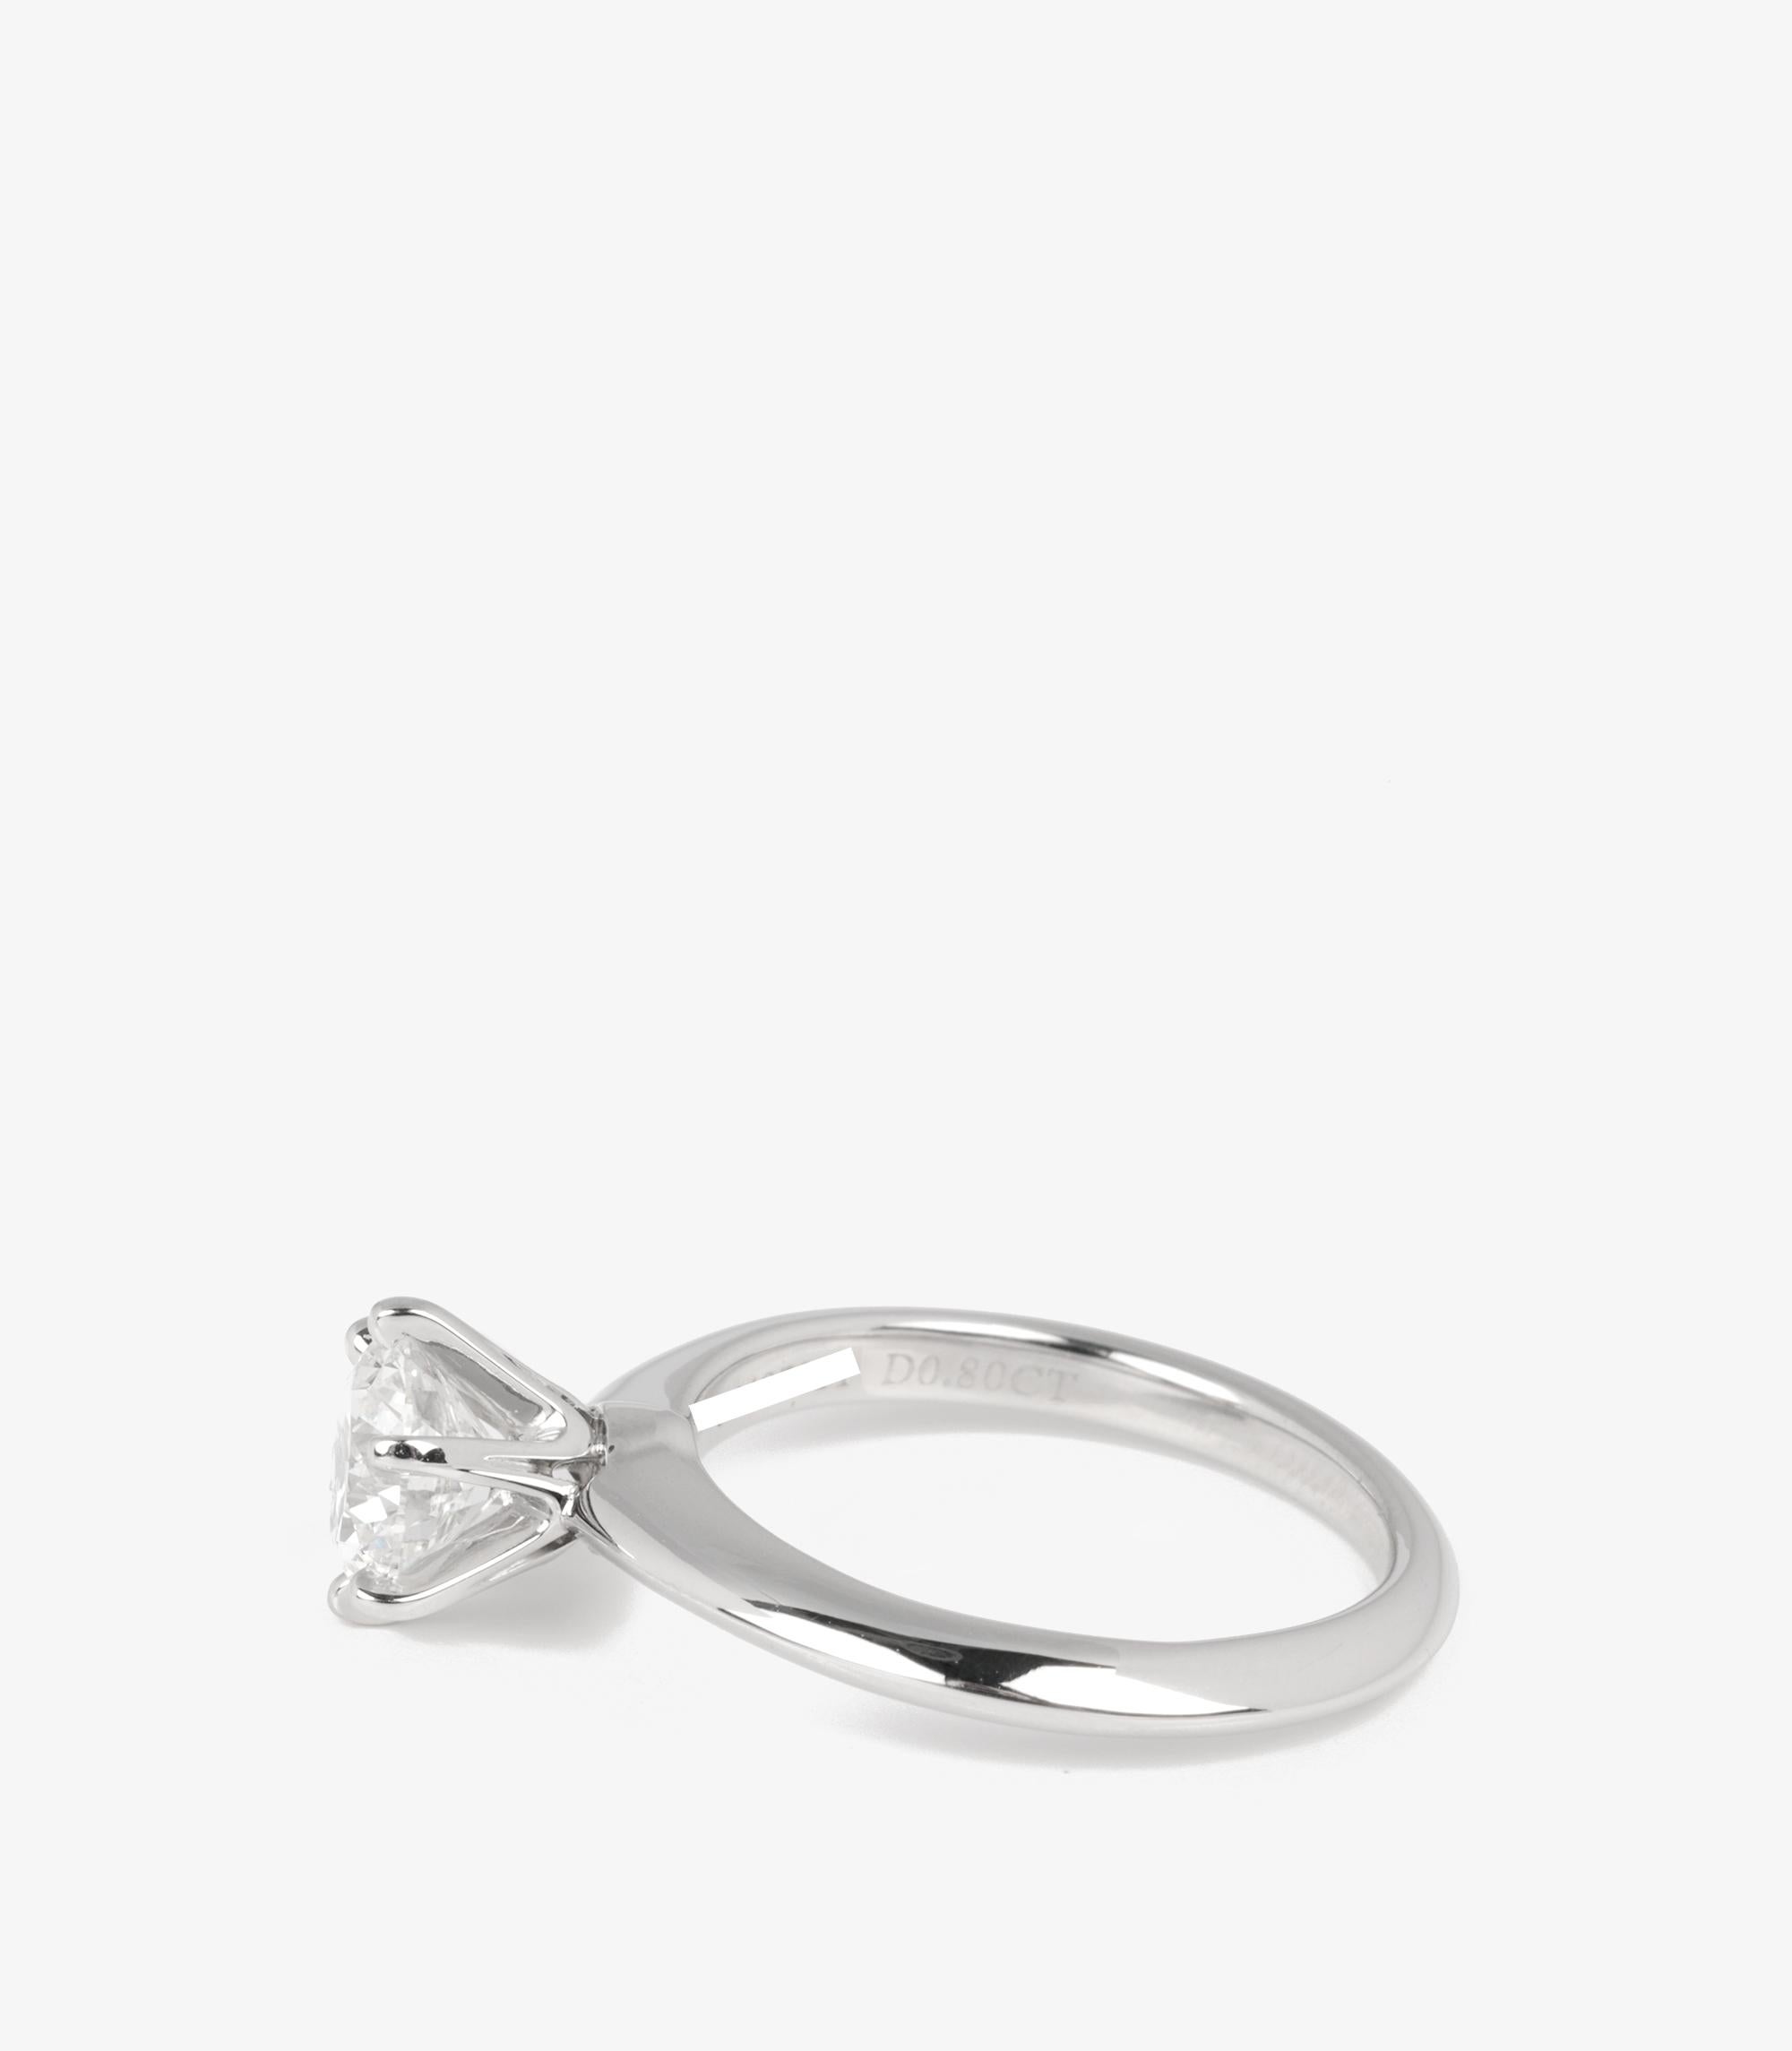 Tiffany & Co. Brilliant Cut 0.8ct Diamond Platinum Tiffany Setting Ring

Brand- Tiffany & Co.
Model- 0.58ct Diamond Tiffany Setting Ring
Product Type- Ring
Serial Number- 62******
Accompanied By- Tiffany & Co. Certificate
Material(s)-